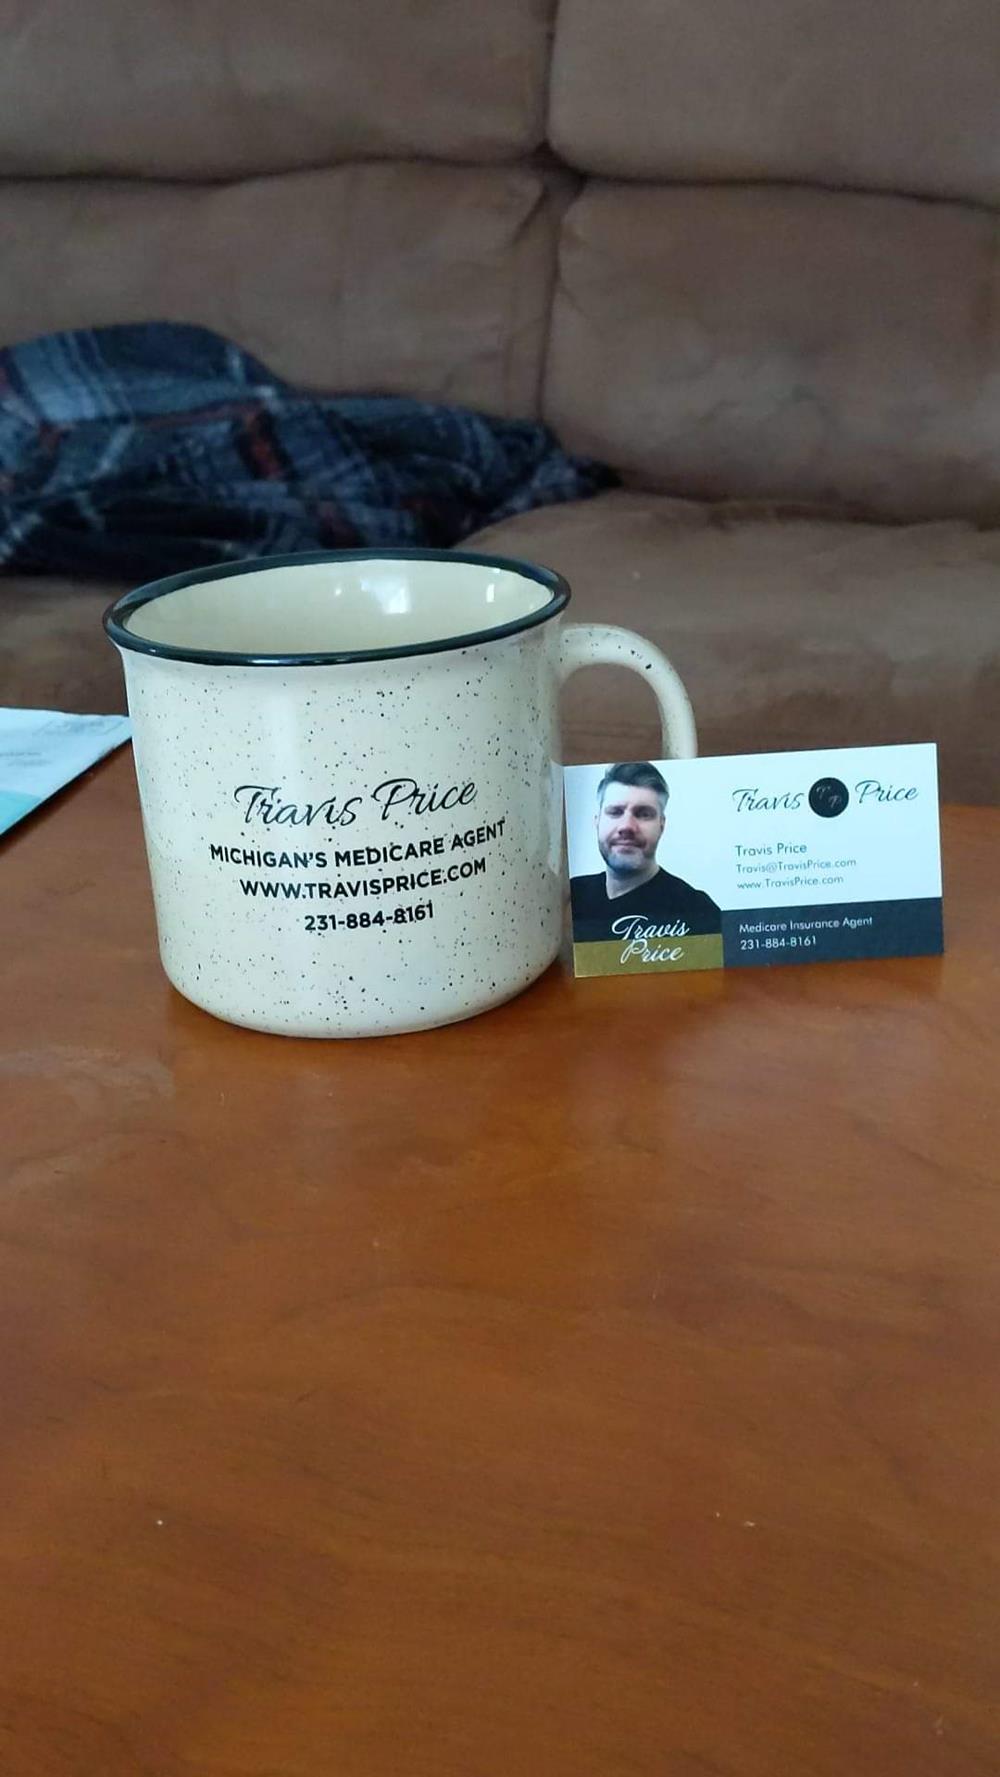 a white mug with black text and a business card on a table